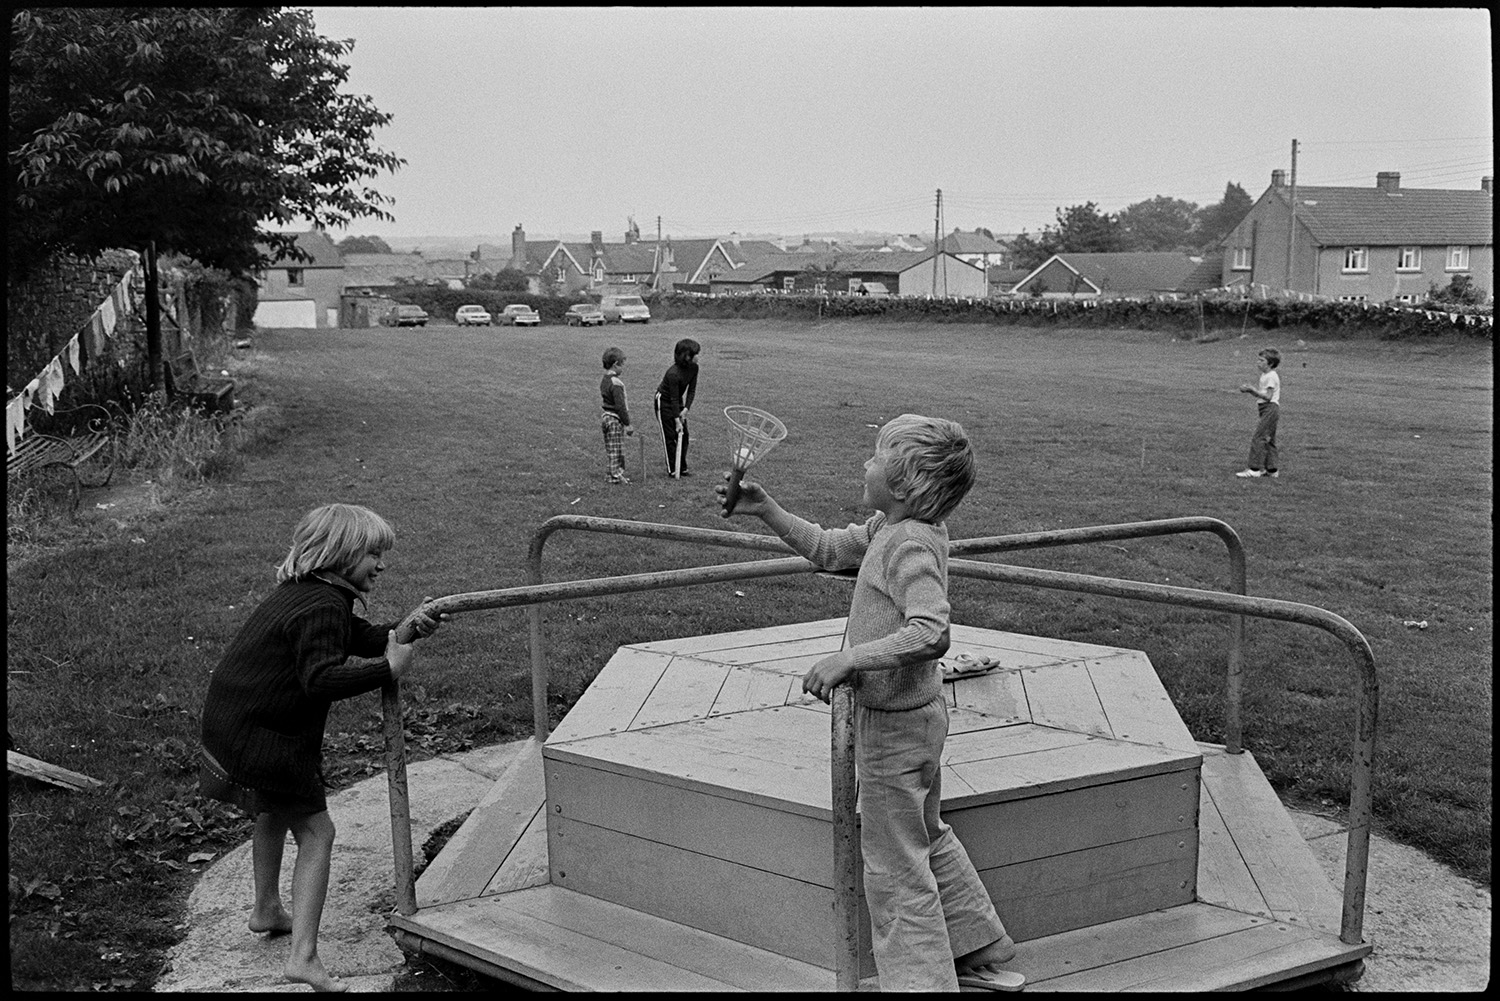 Village playground, children. 
[Children playing on a roundabout in the village playing field at Beaford. One of the children is holding a cup and ball. More children can be seen playing cricket behind them. In the background houses and parked cars are visible.]